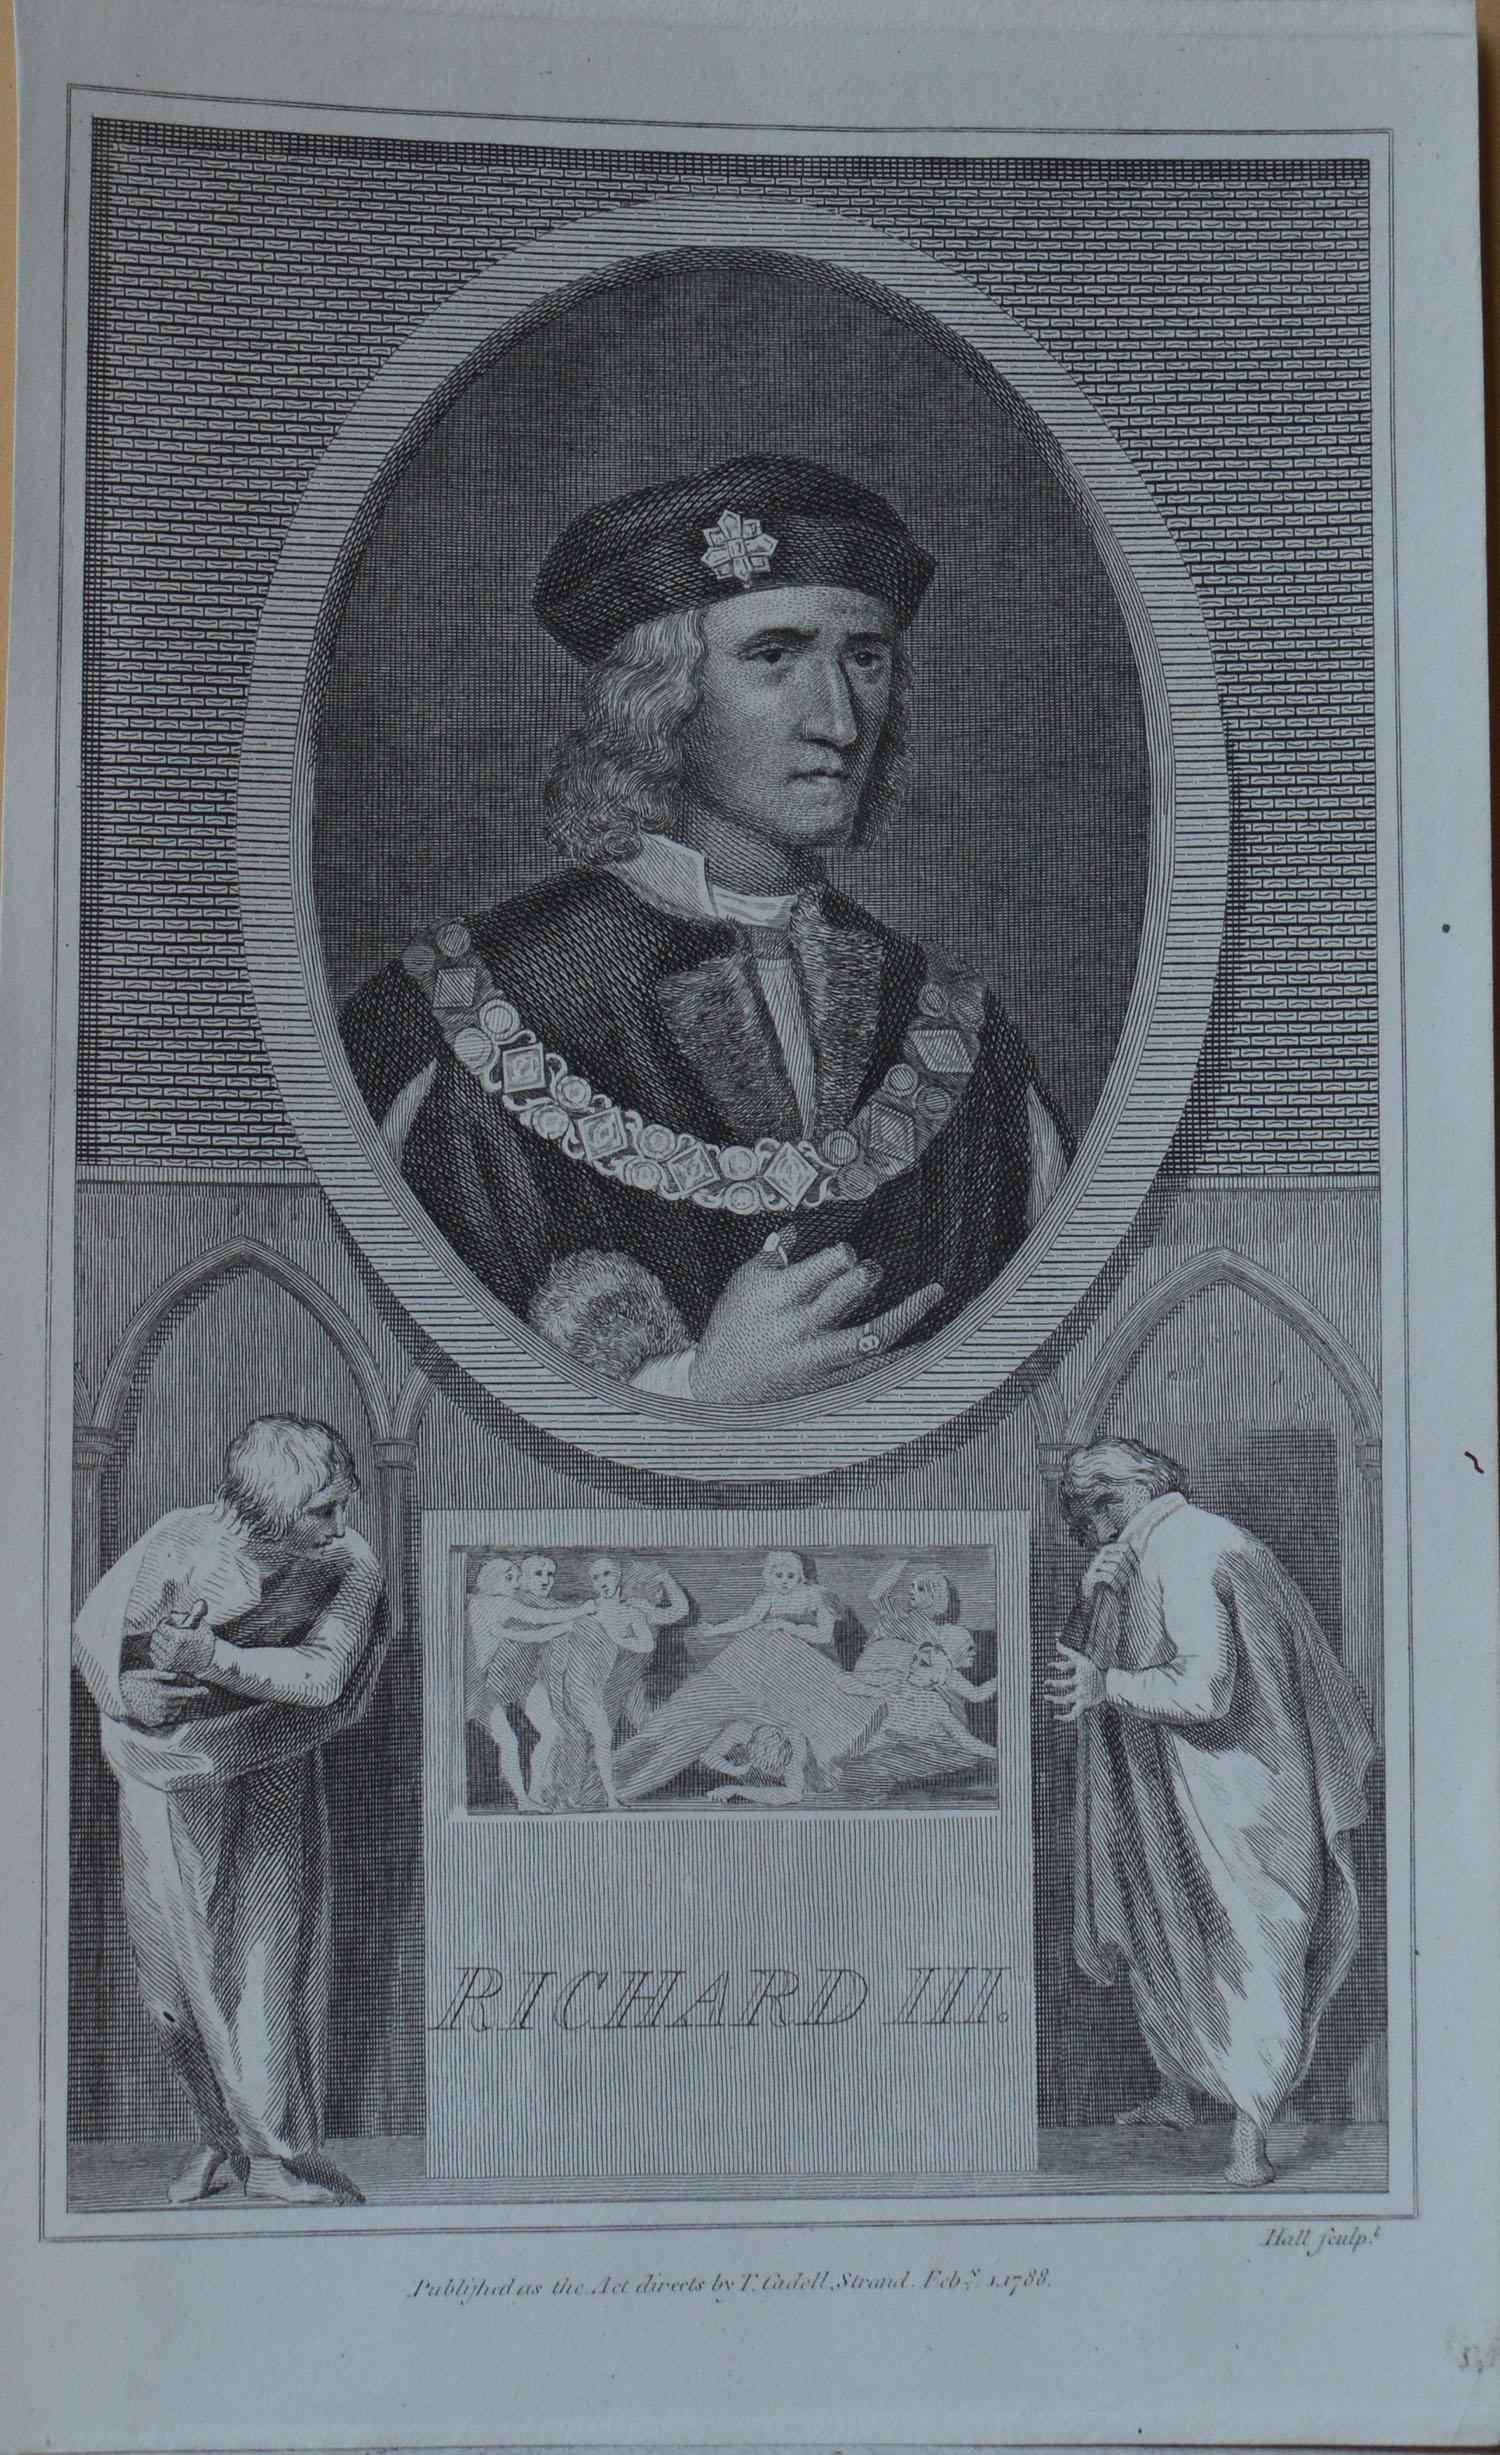 Paper Set of 25 Antique Prints of English Royal Portraits, Dated 1788